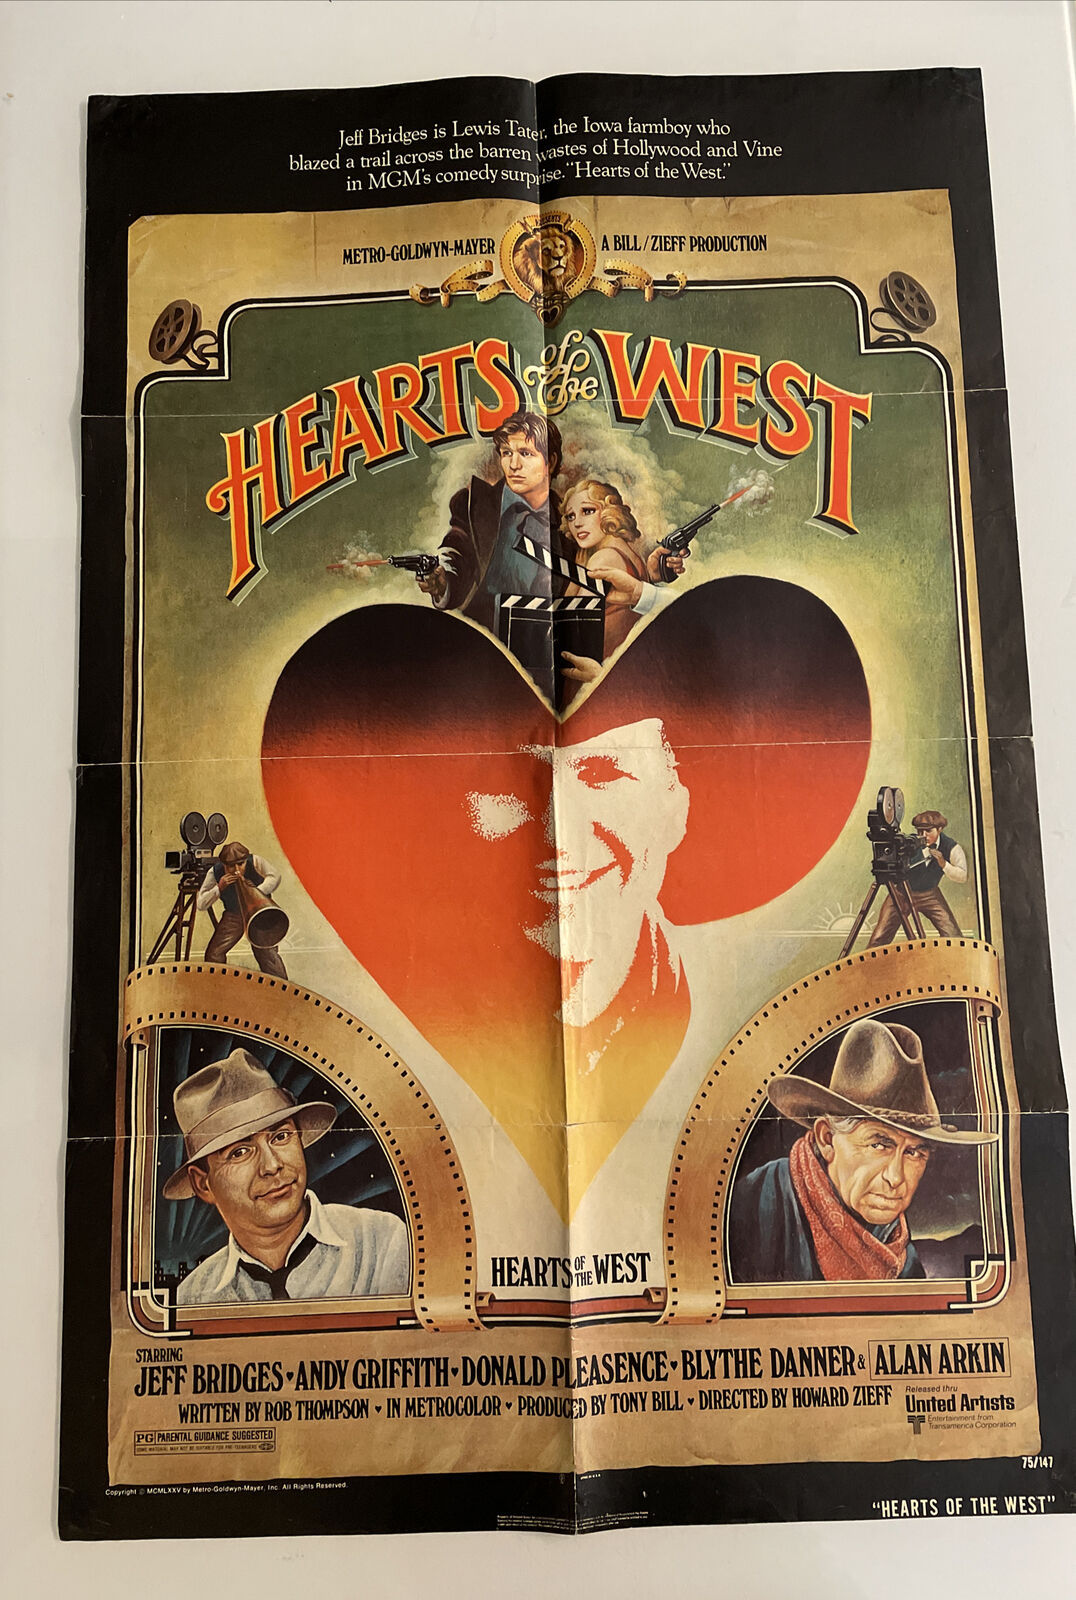 Primary image for Vintage Movie Poster: Hearts of the West - Andy Griffith, Jeff Bridges / RH